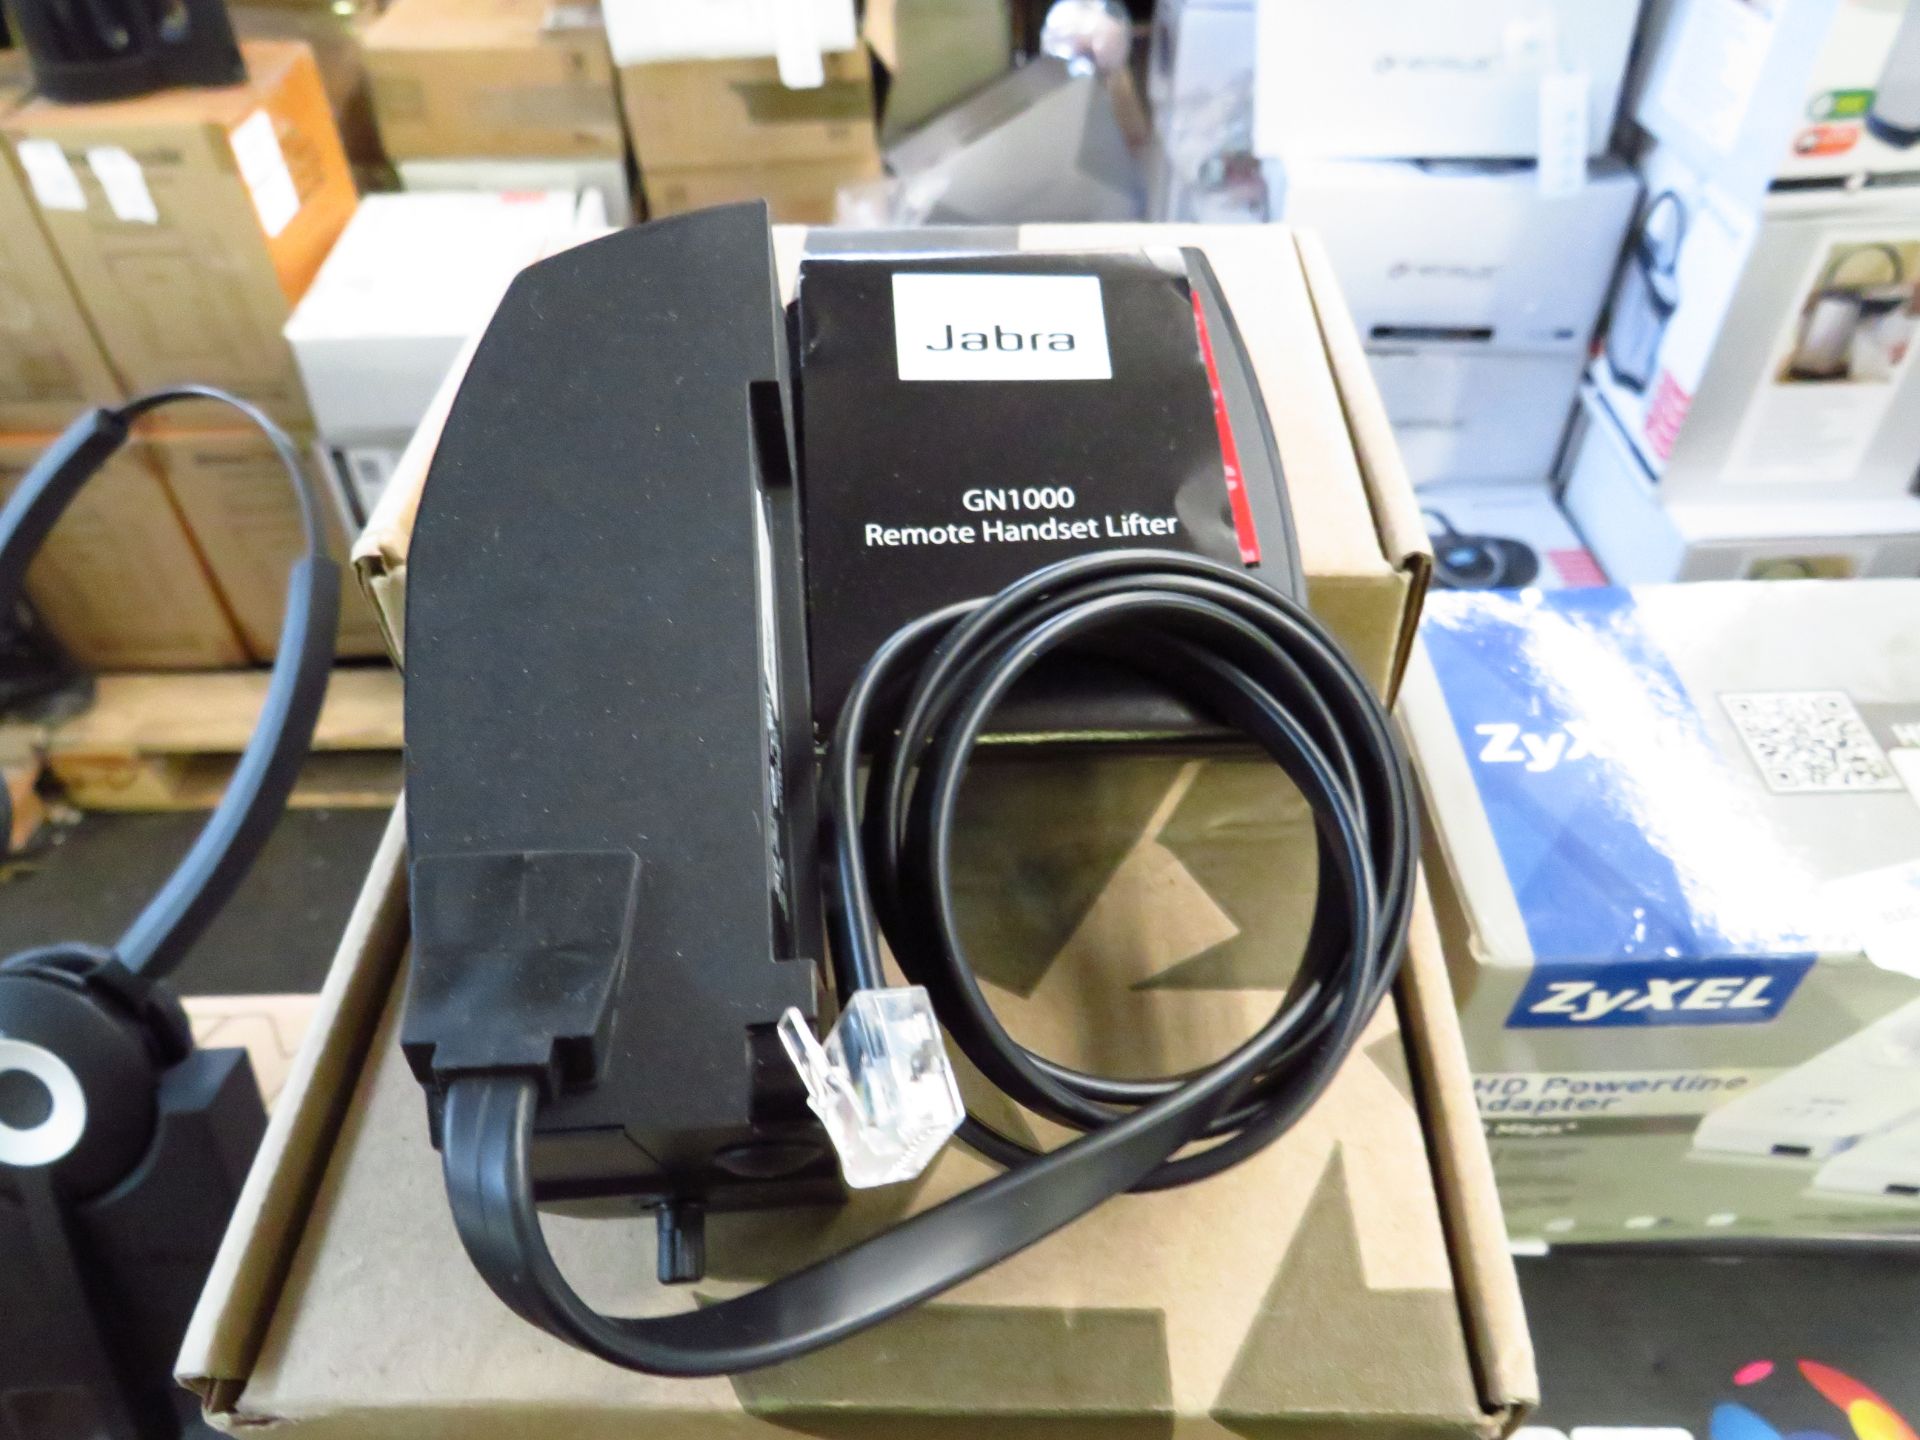 Jabra GN1000 Remote handset lifter, new and boxed